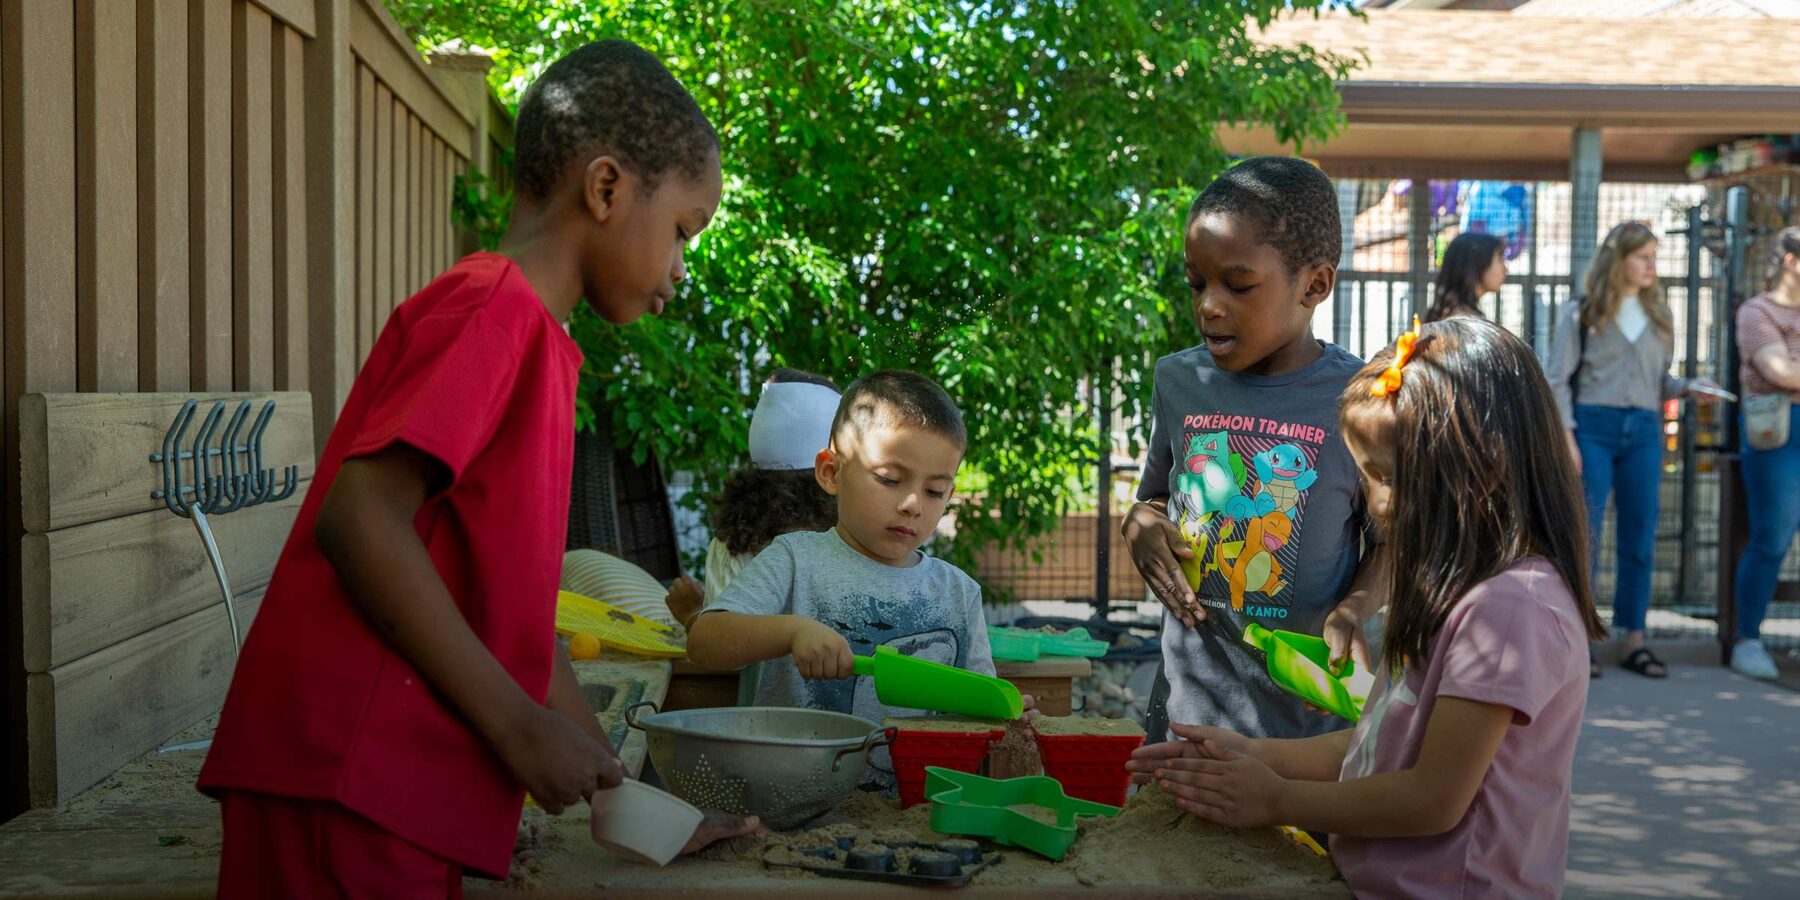 Kids play with sand and tools outdoors at the Little Giants Learning Center